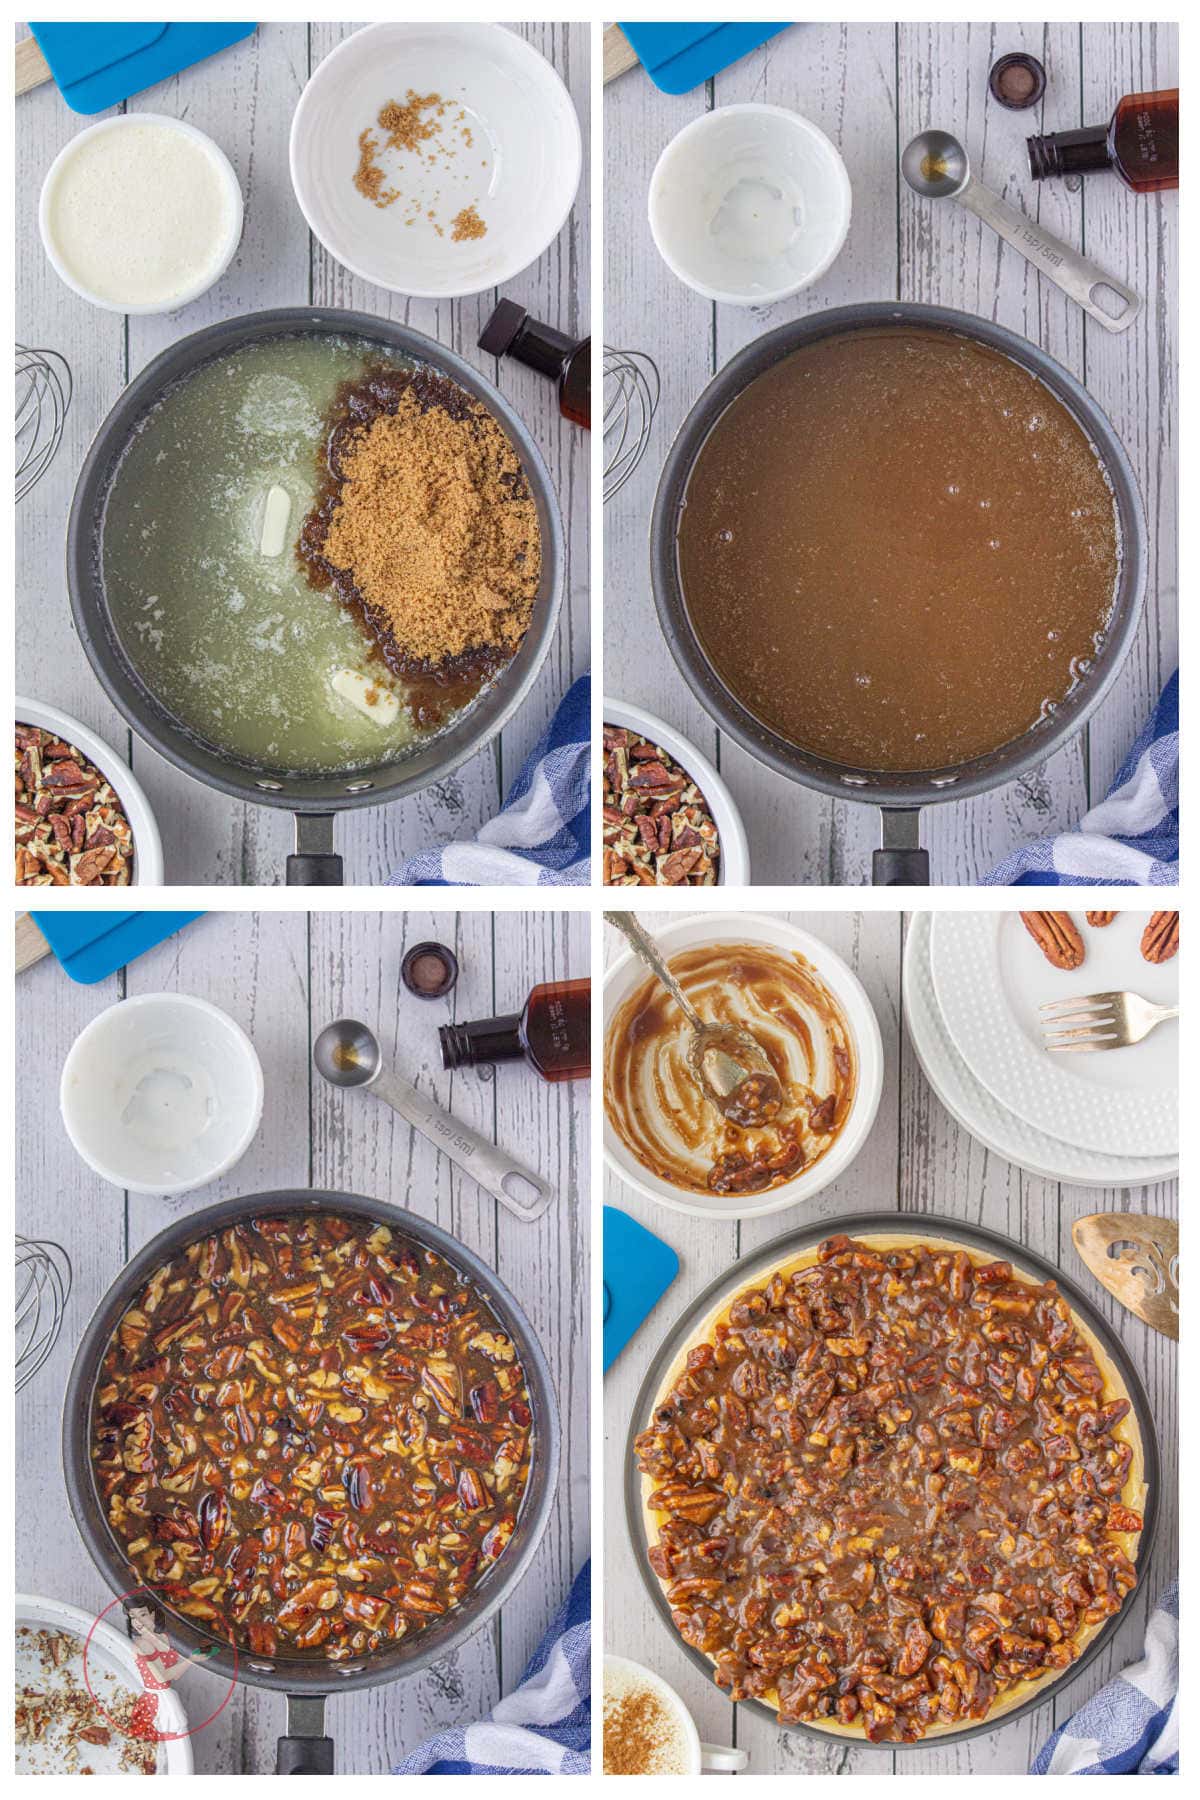 Step by step images showing how to make the gooey praline topping for the cheesecake.